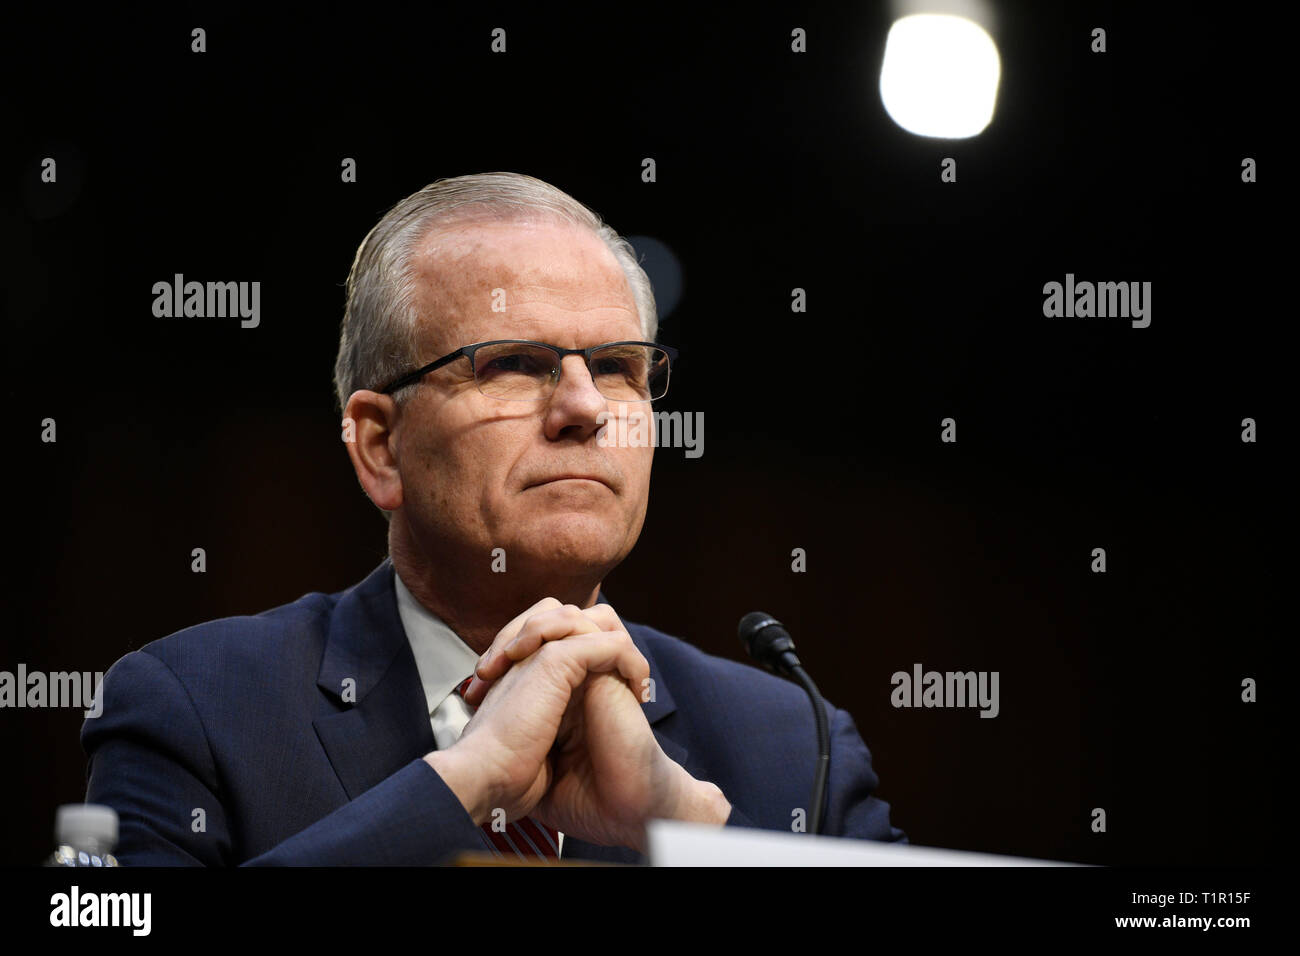 Washington, USA. 27th Mar, 2019. Daniel Elwell, acting administrator of the U.S. Federal Aviation Administration (FAA), attends a Senate Commerce Committee hearing on airline safety in Washington, DC, the United States, on March 27, 2019. The U.S. Federal Aviation Administration (FAA) on Wednesday vowed to revamp its air safety oversight after two deadly crashes involving Boeing 737 Max jets in less than five months pointed to possible lapses in the aircraft approval process. Credit: Liu Jie/Xinhua/Alamy Live News Stock Photo